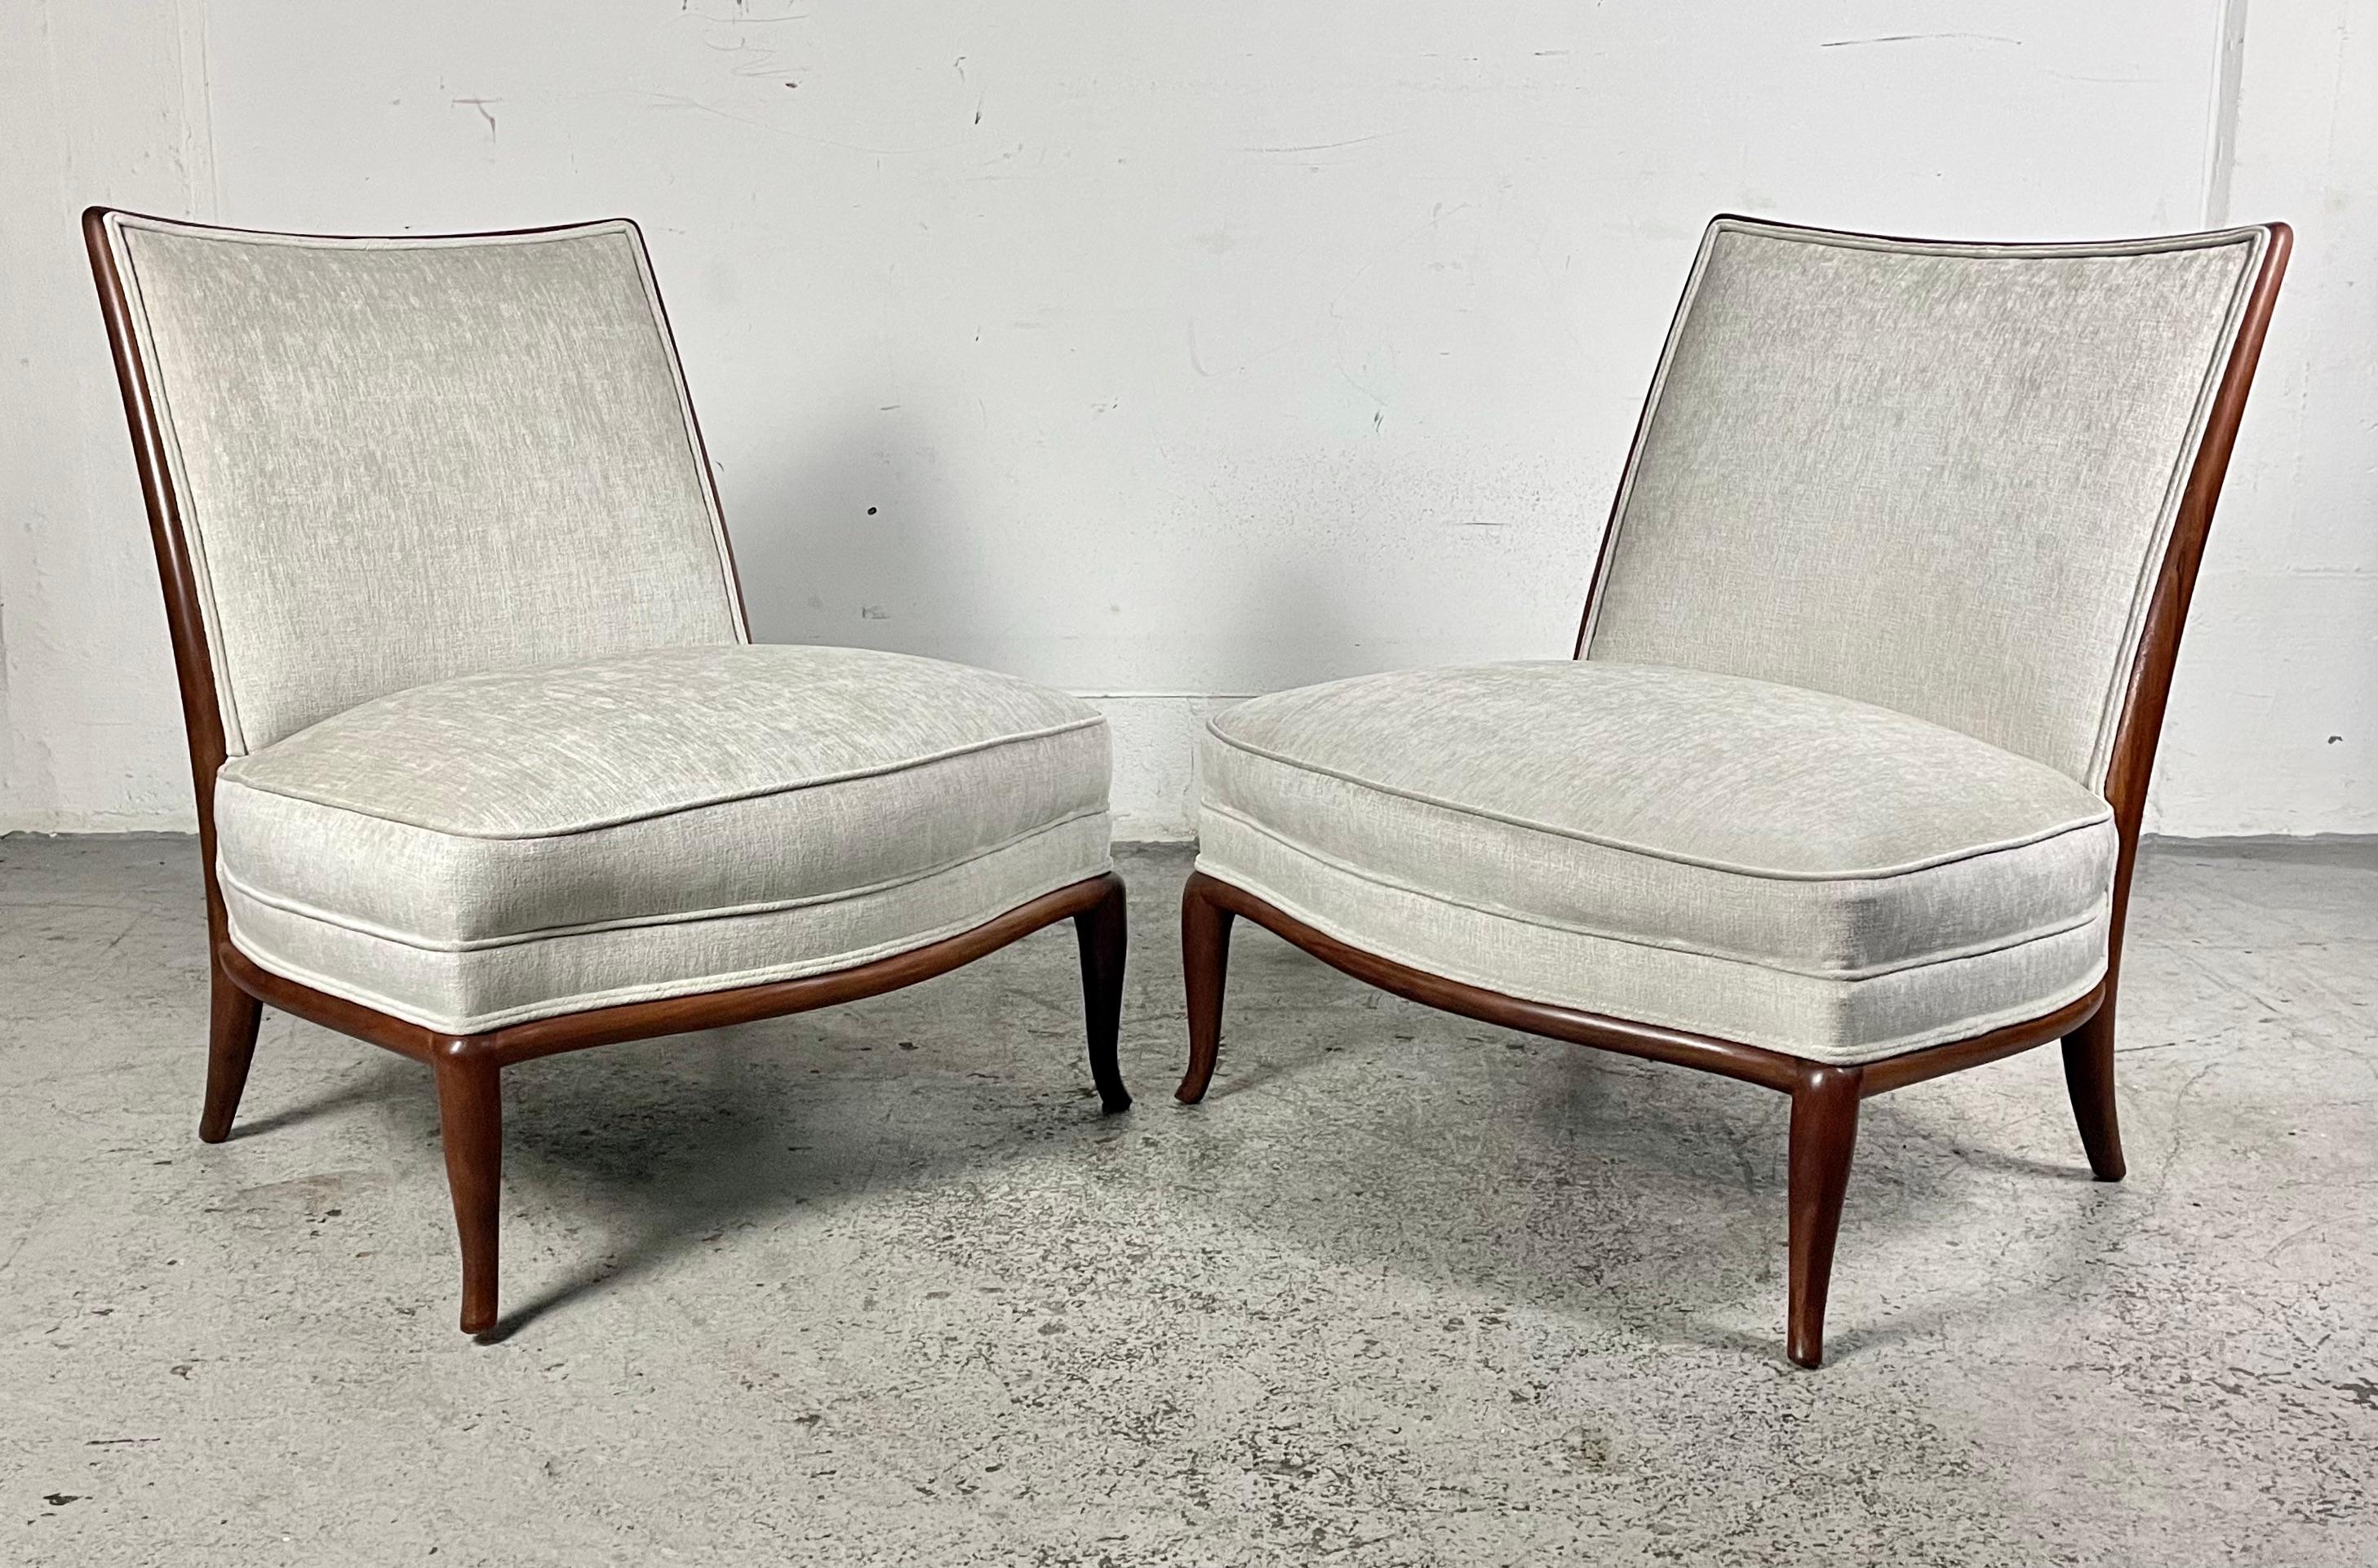 A fabulous and timeless pair of slipper chairs by T.H. Robsjohn-Gibbings for Widdicomb. The graceful curvy lines complement these scaled up accent chairs. Tastefully reupholstered in Knoll Summit fabric in a neutral alabaster white color and soft